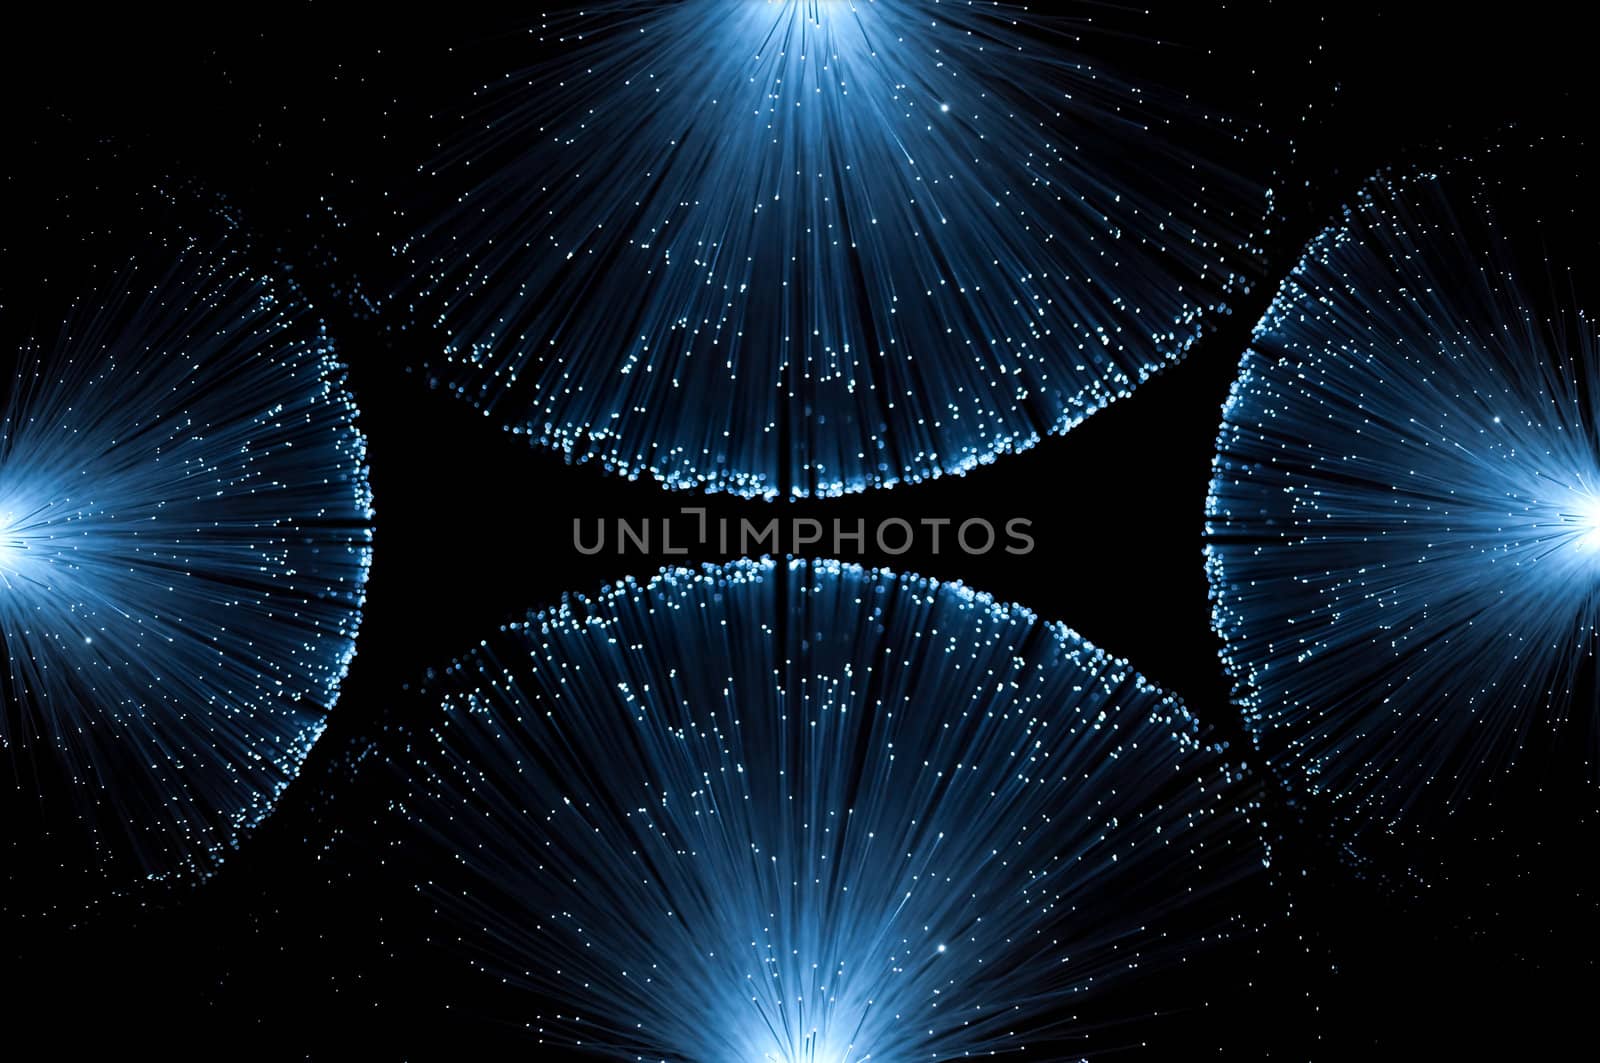 Four groups of illuminated blue fibre optic light strands eminating from each edge of the image against a black background.